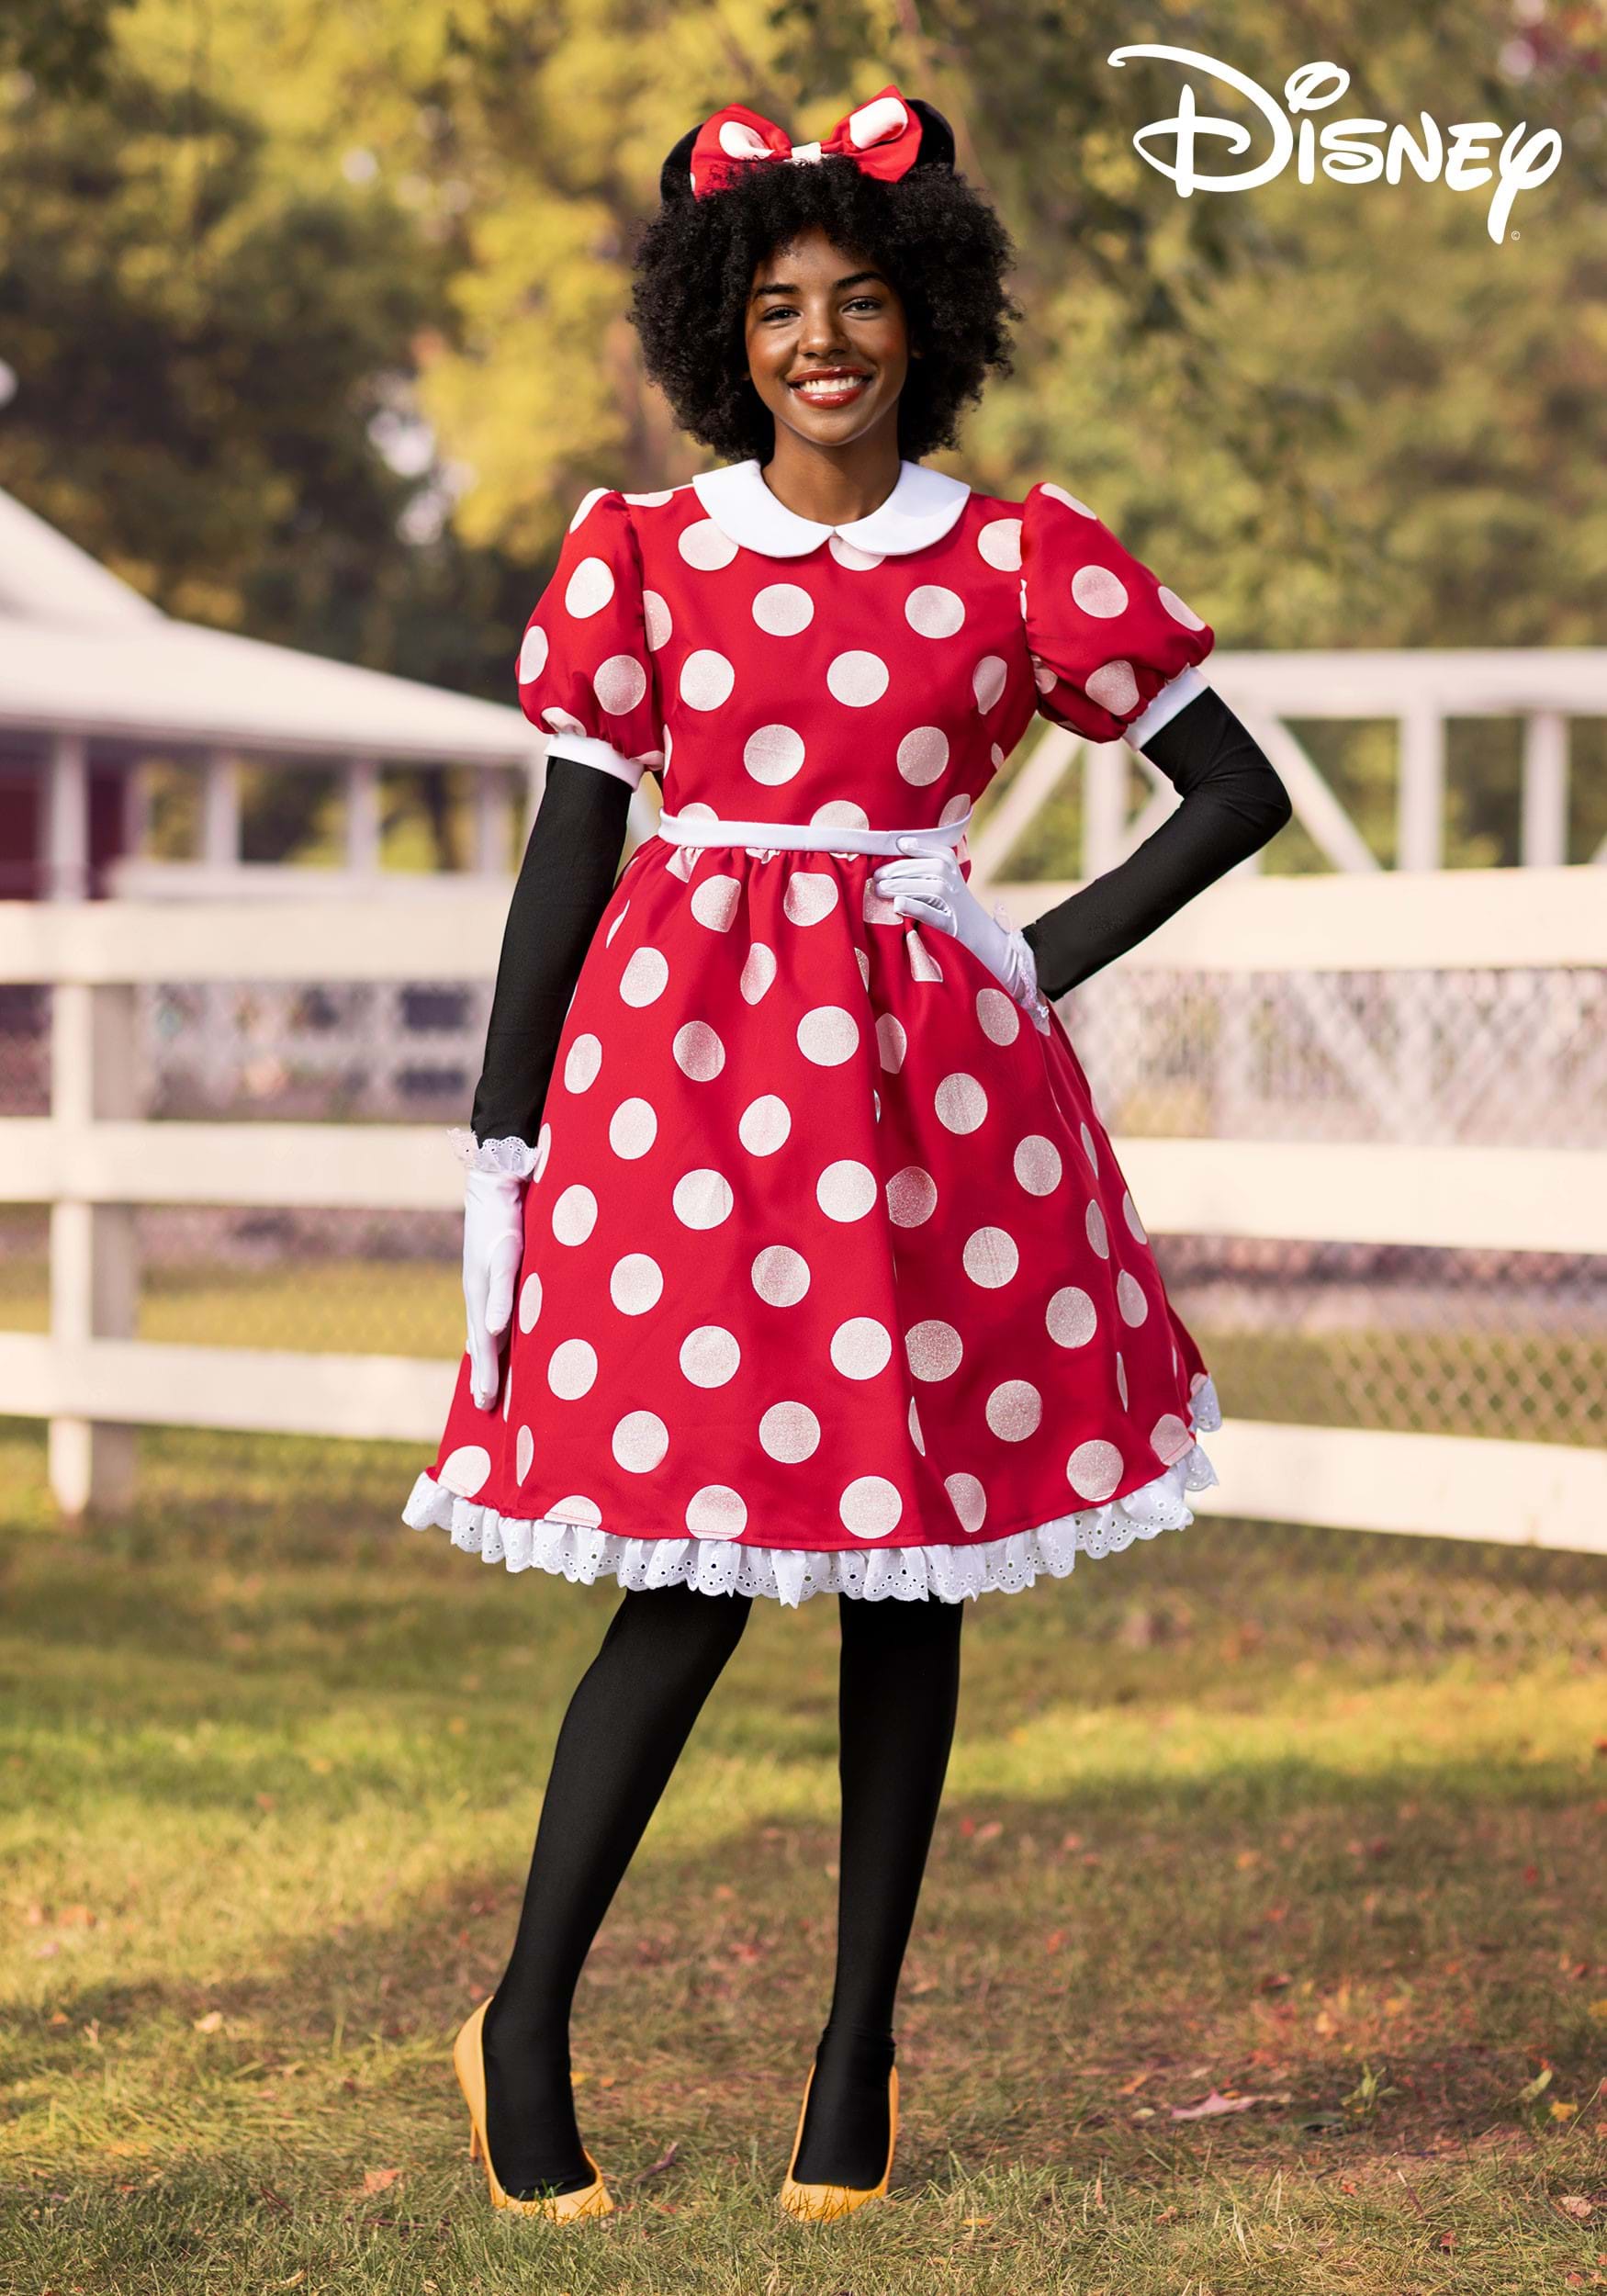 Disney Adult Deluxe Minnie Mouse Costume